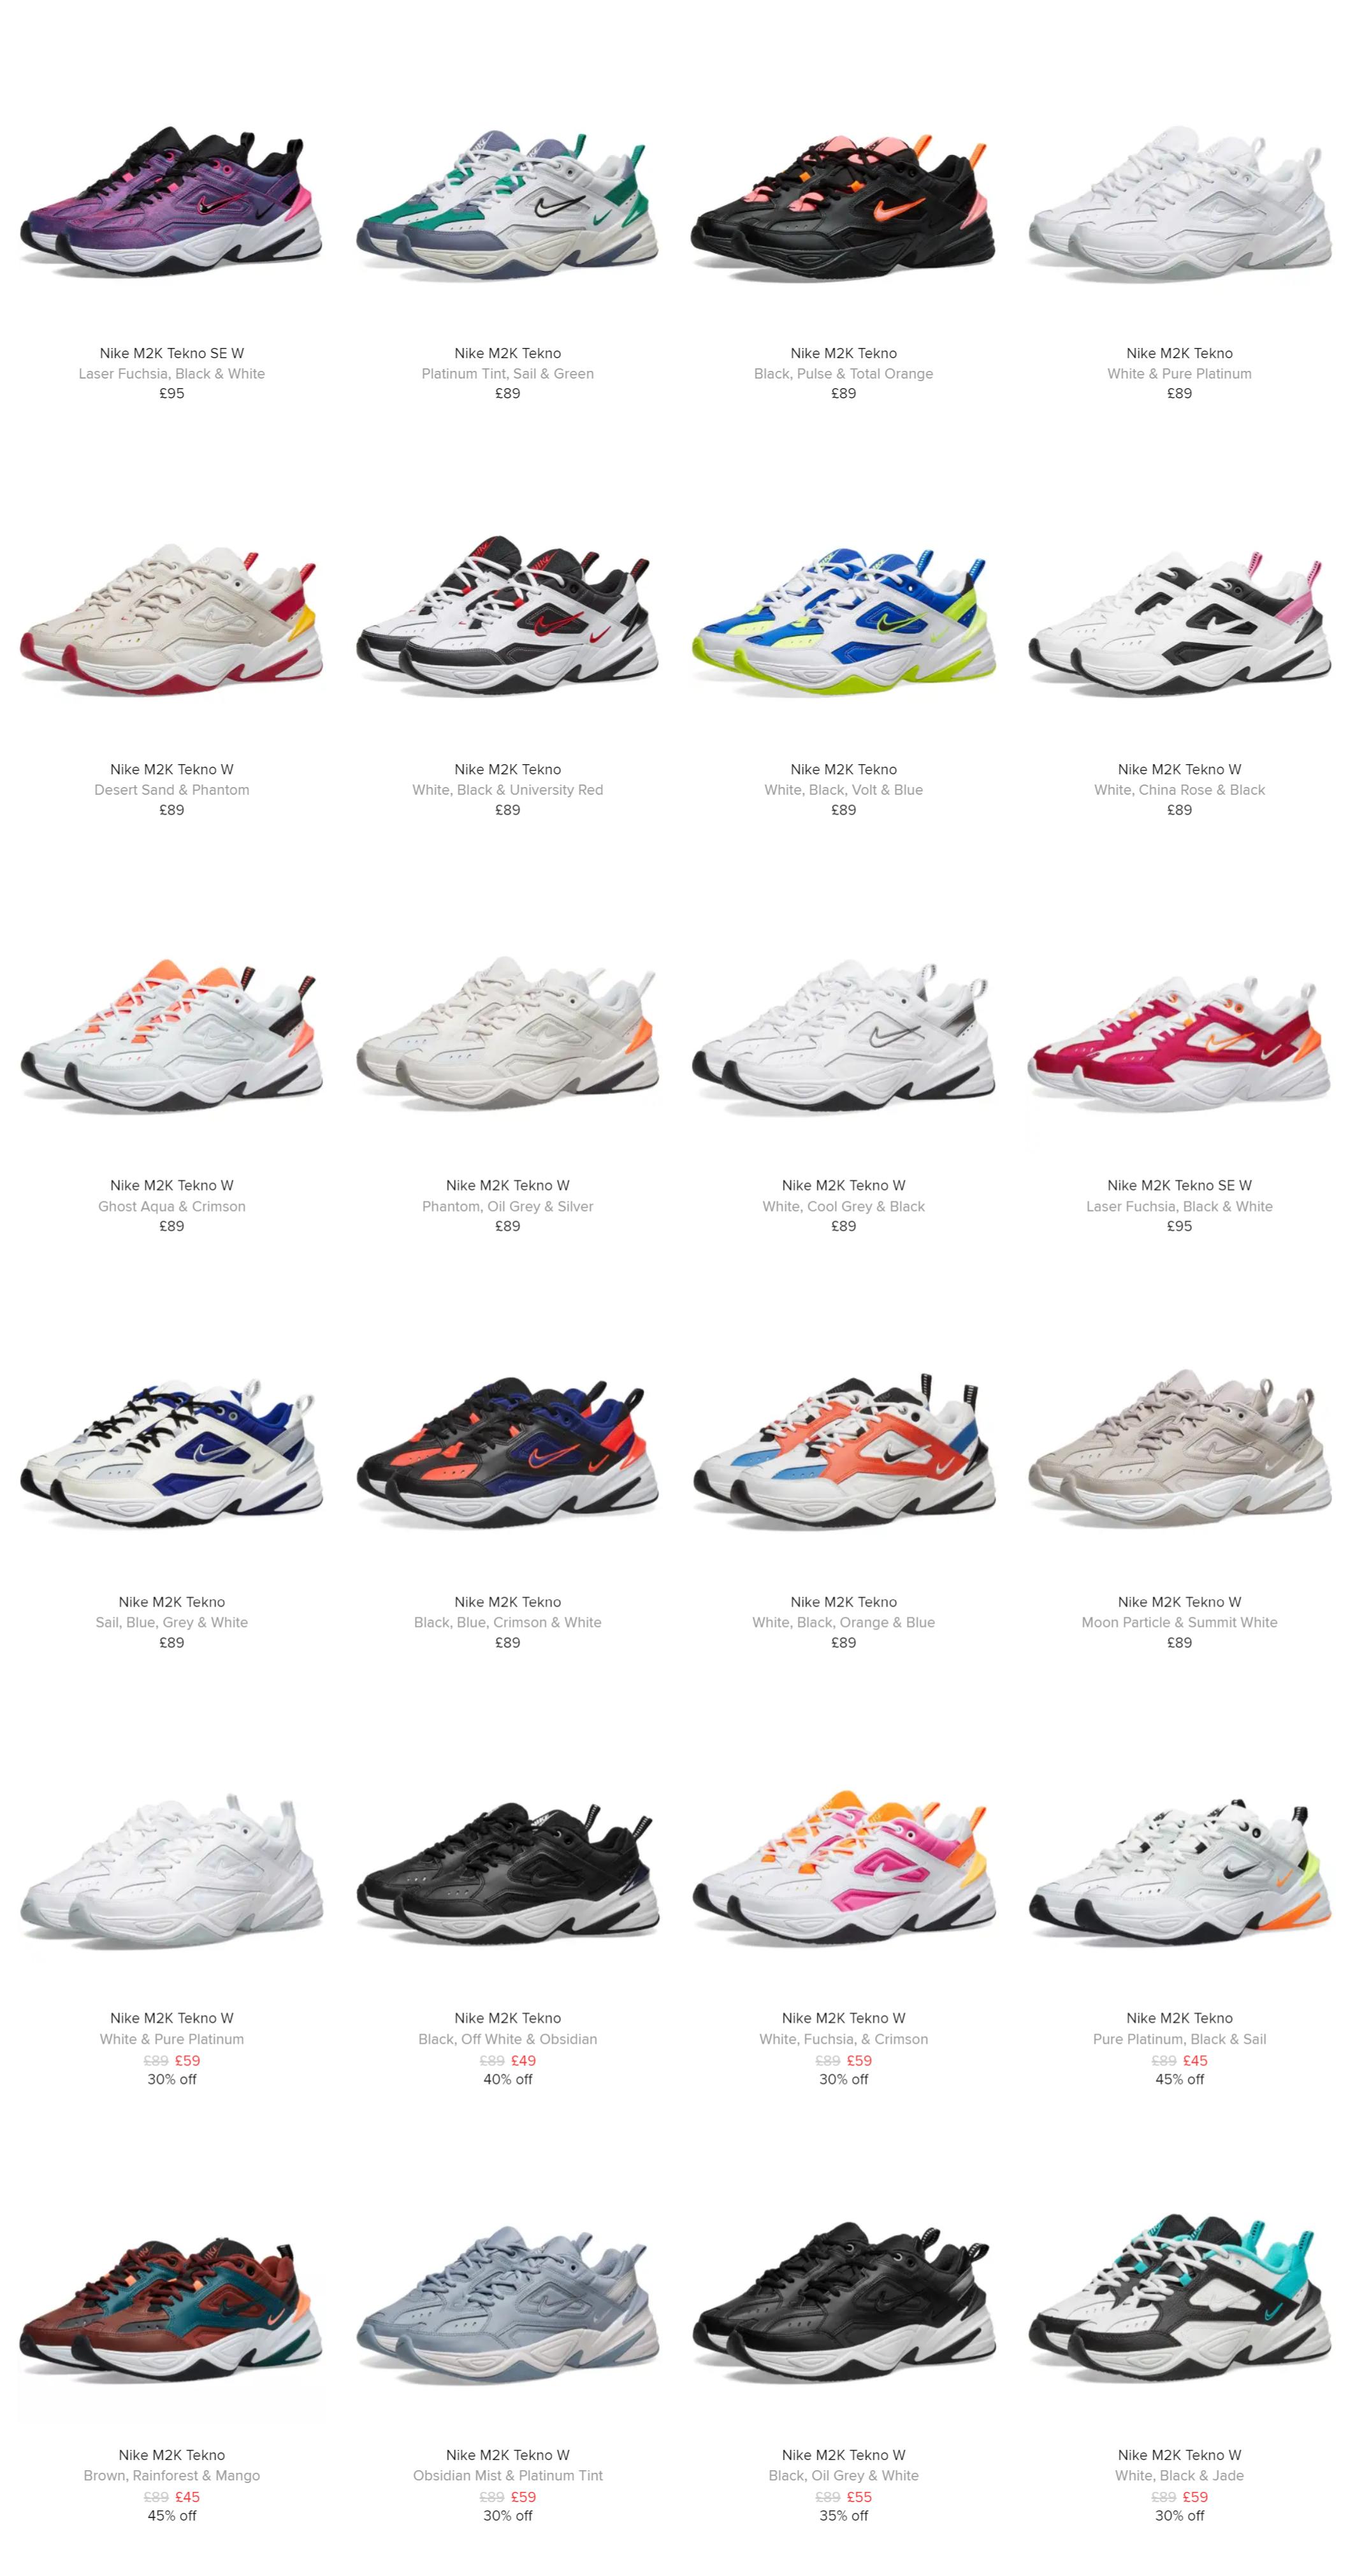 Police station test Warship Twitter 上的MoreSneakers.com："AD : Nike M2K Tekno styles available with 25%  OFF including sale items on END Need to be logged in, see price in cart  EU:https://t.co/qdmA0UvjcE US:https://t.co/Klg2DUgmFf  https://t.co/u0Ha0Q3ah8" / Twitter